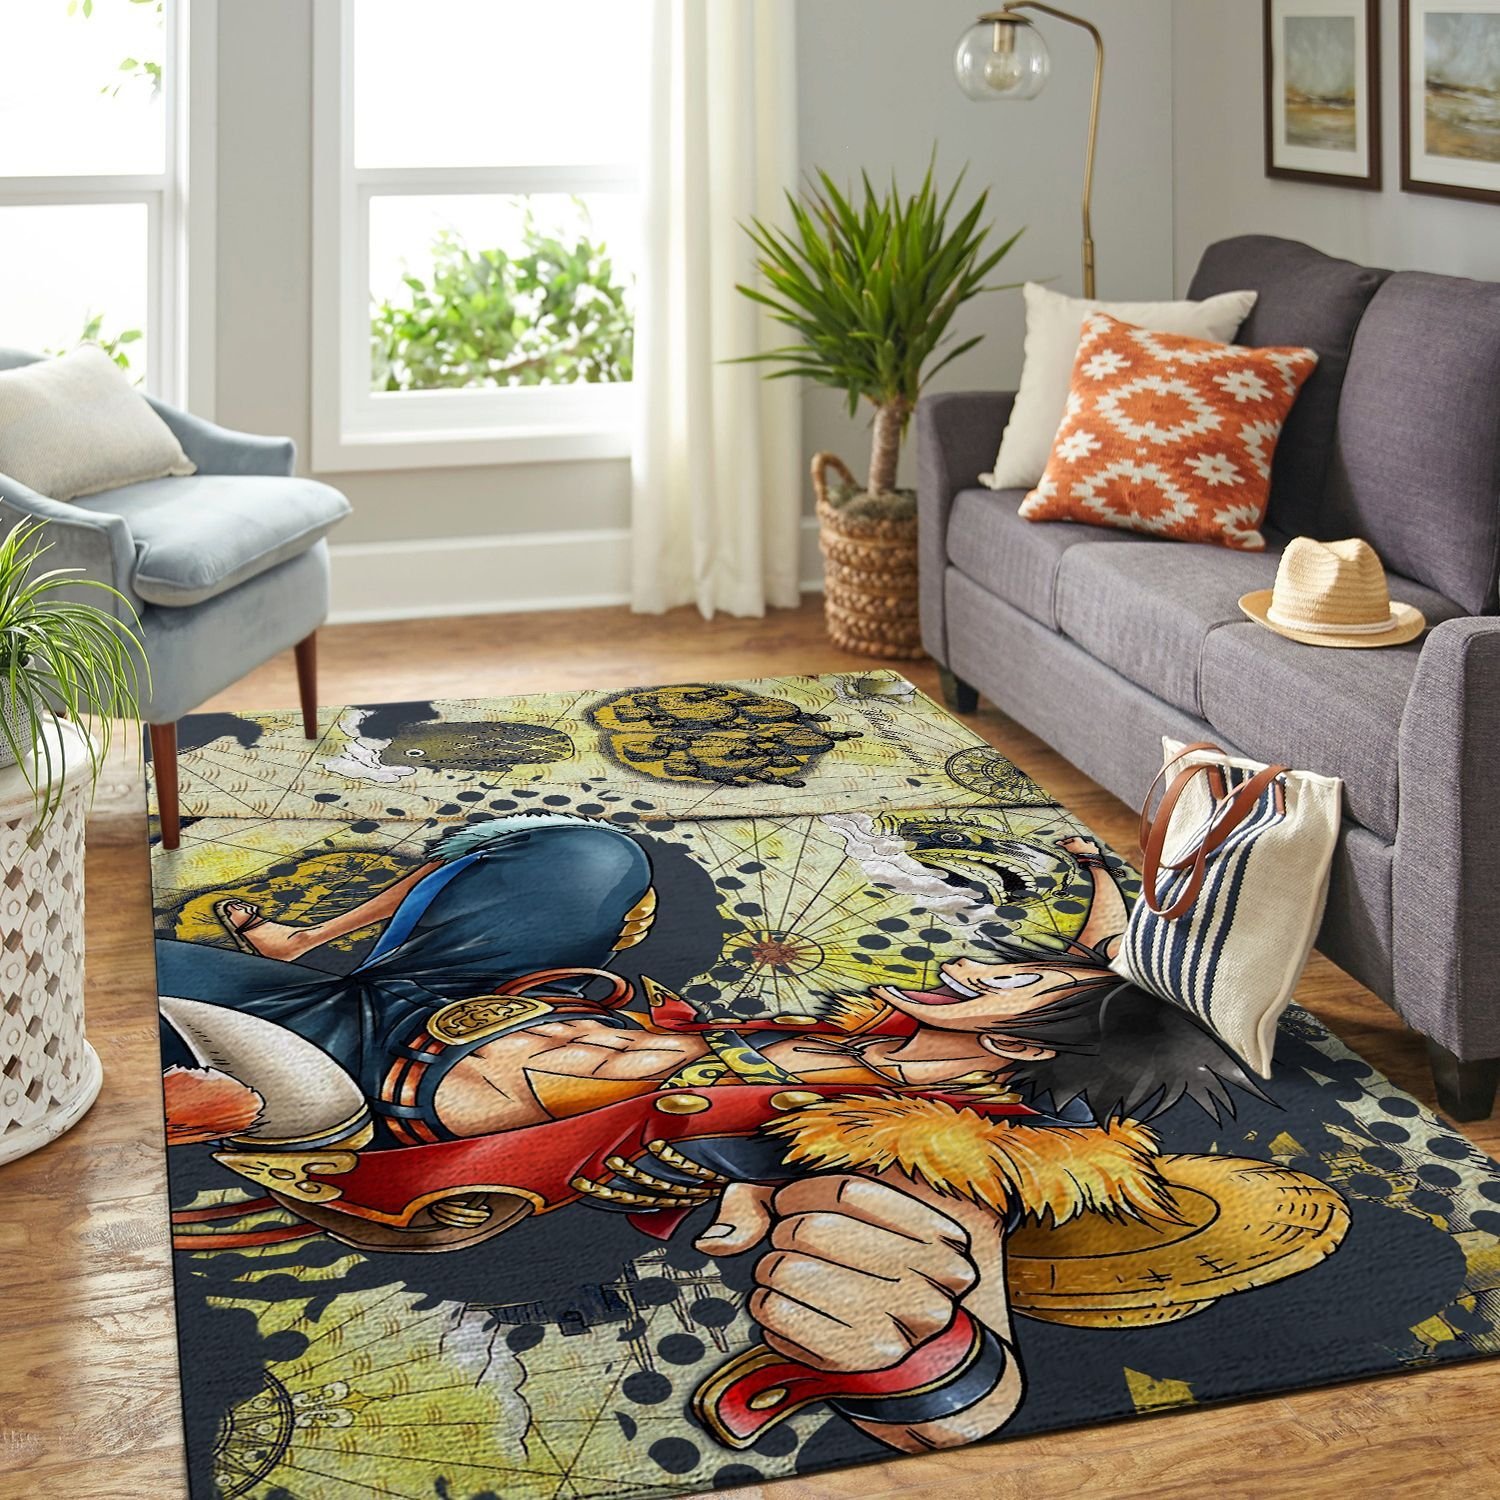 Amazon Onepiece-luffy Living Room Area No6444 Rug